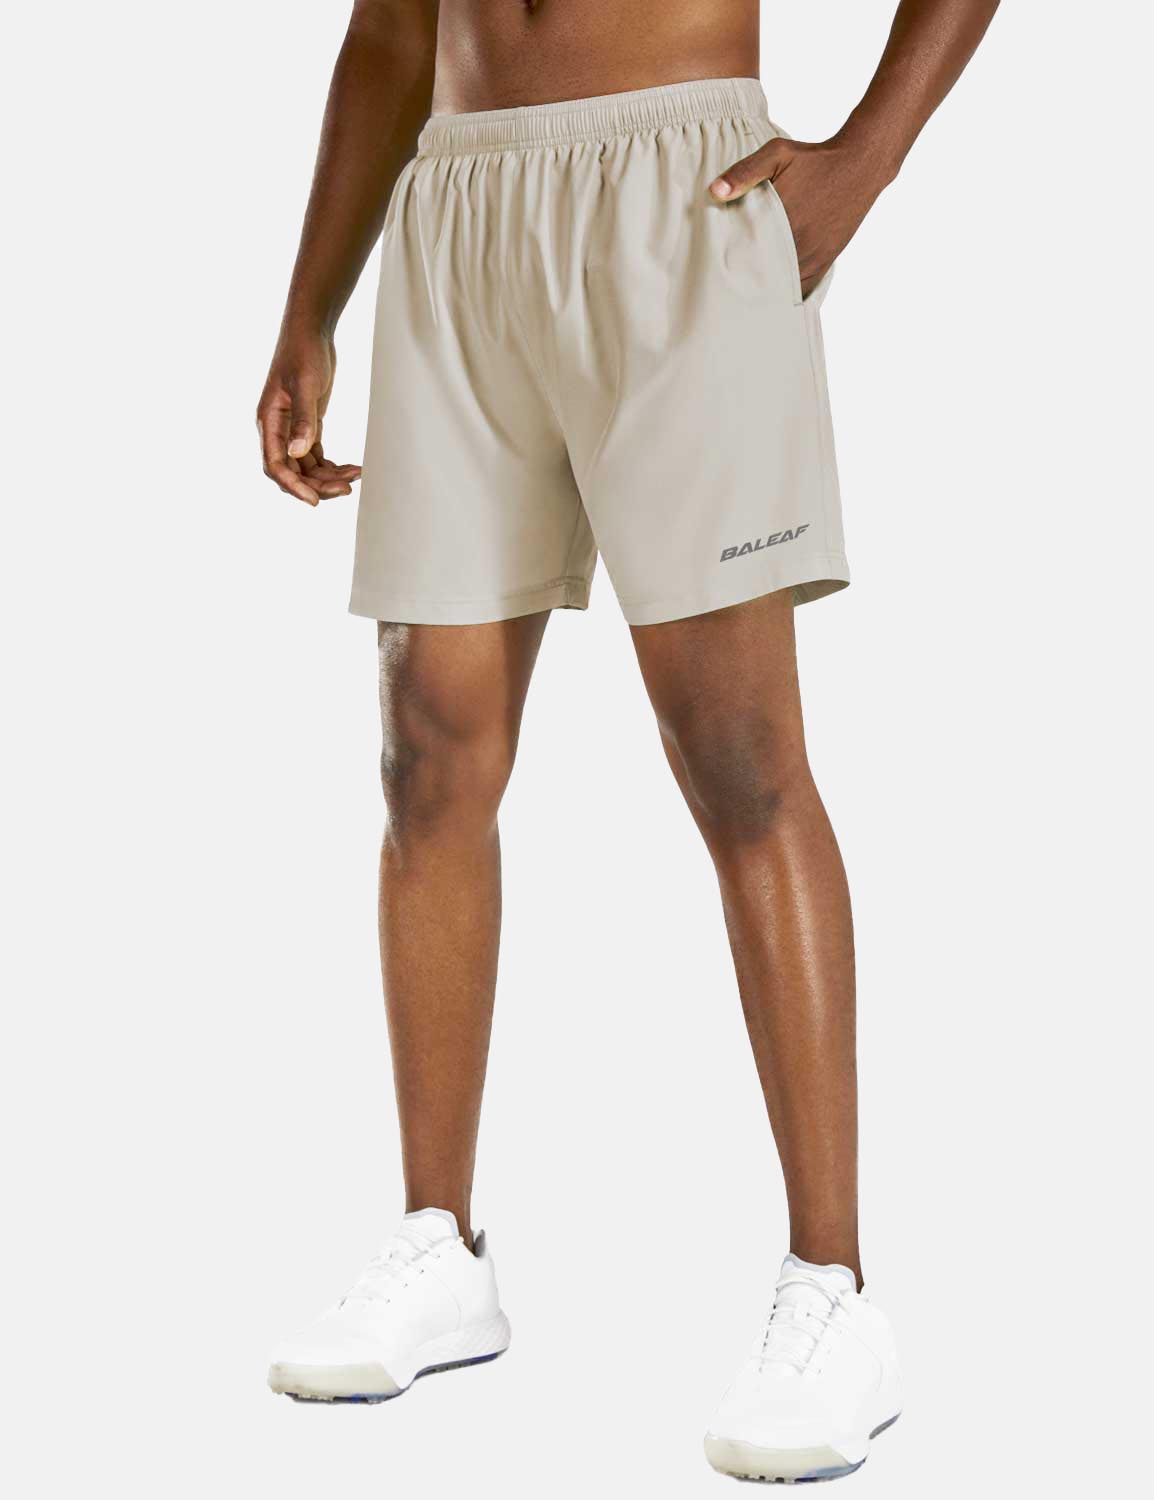 Baleaf Men's 5'' Light-Weight Quick Dry Fully Lined Shorts abd215 White Main